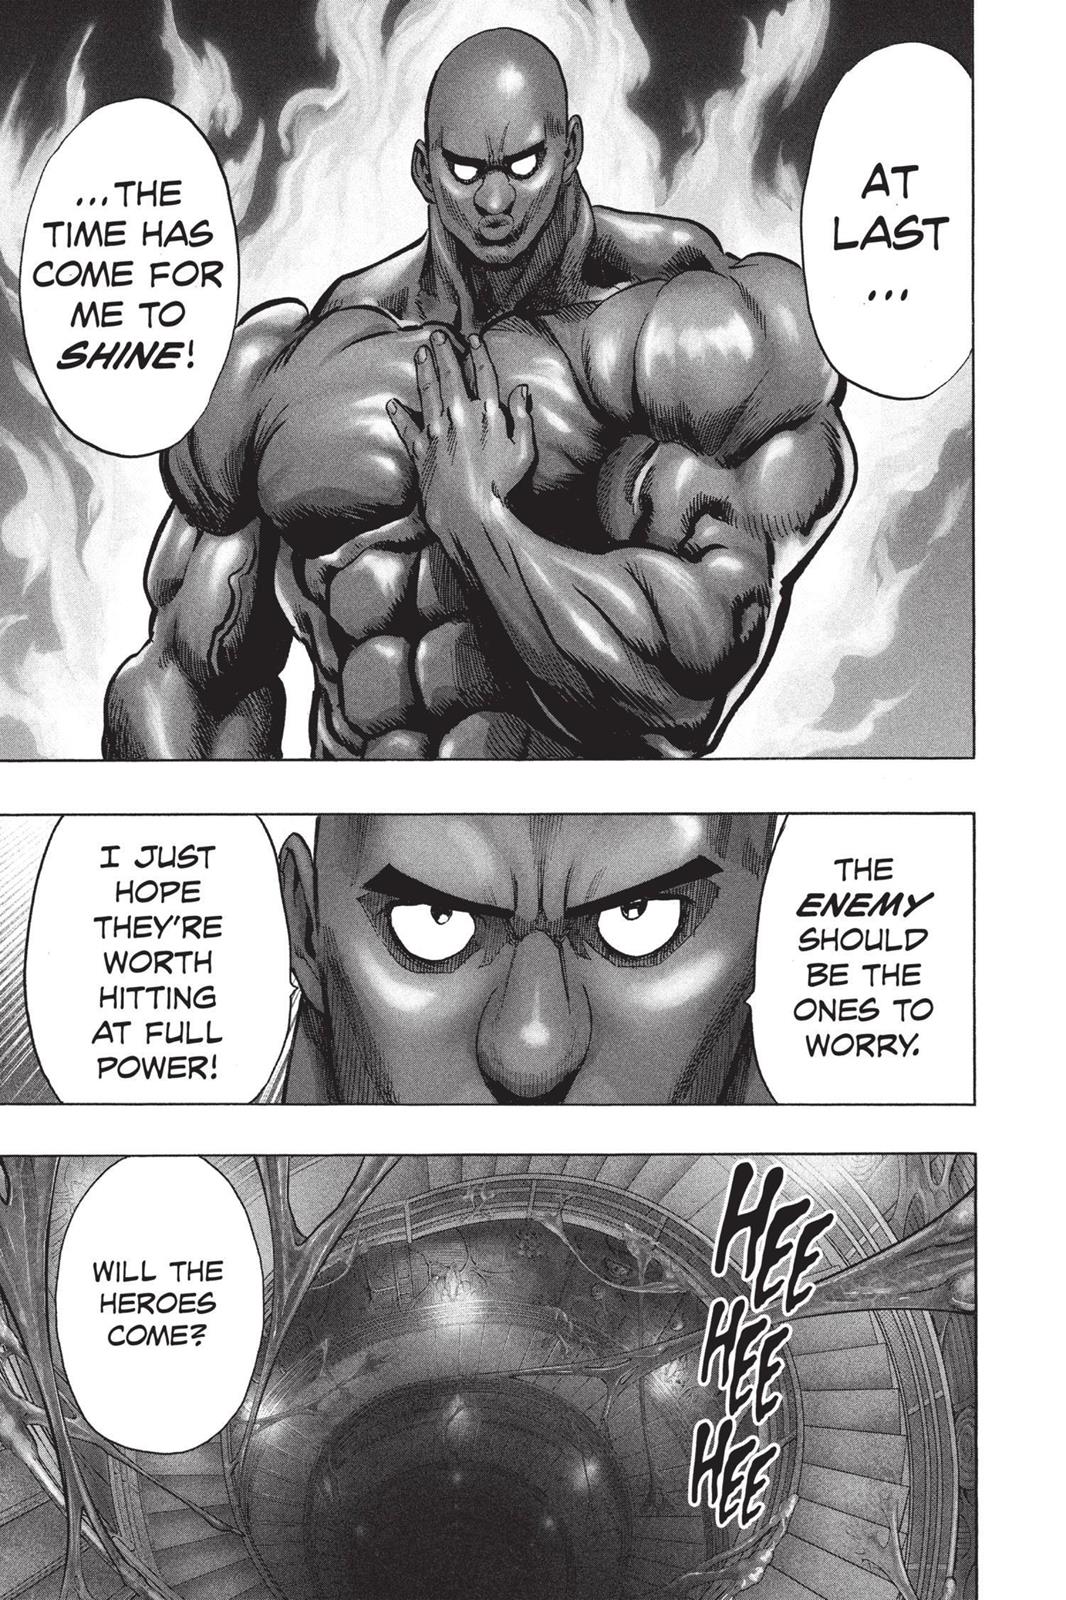 One-Punch Man, Punch 79 image 27